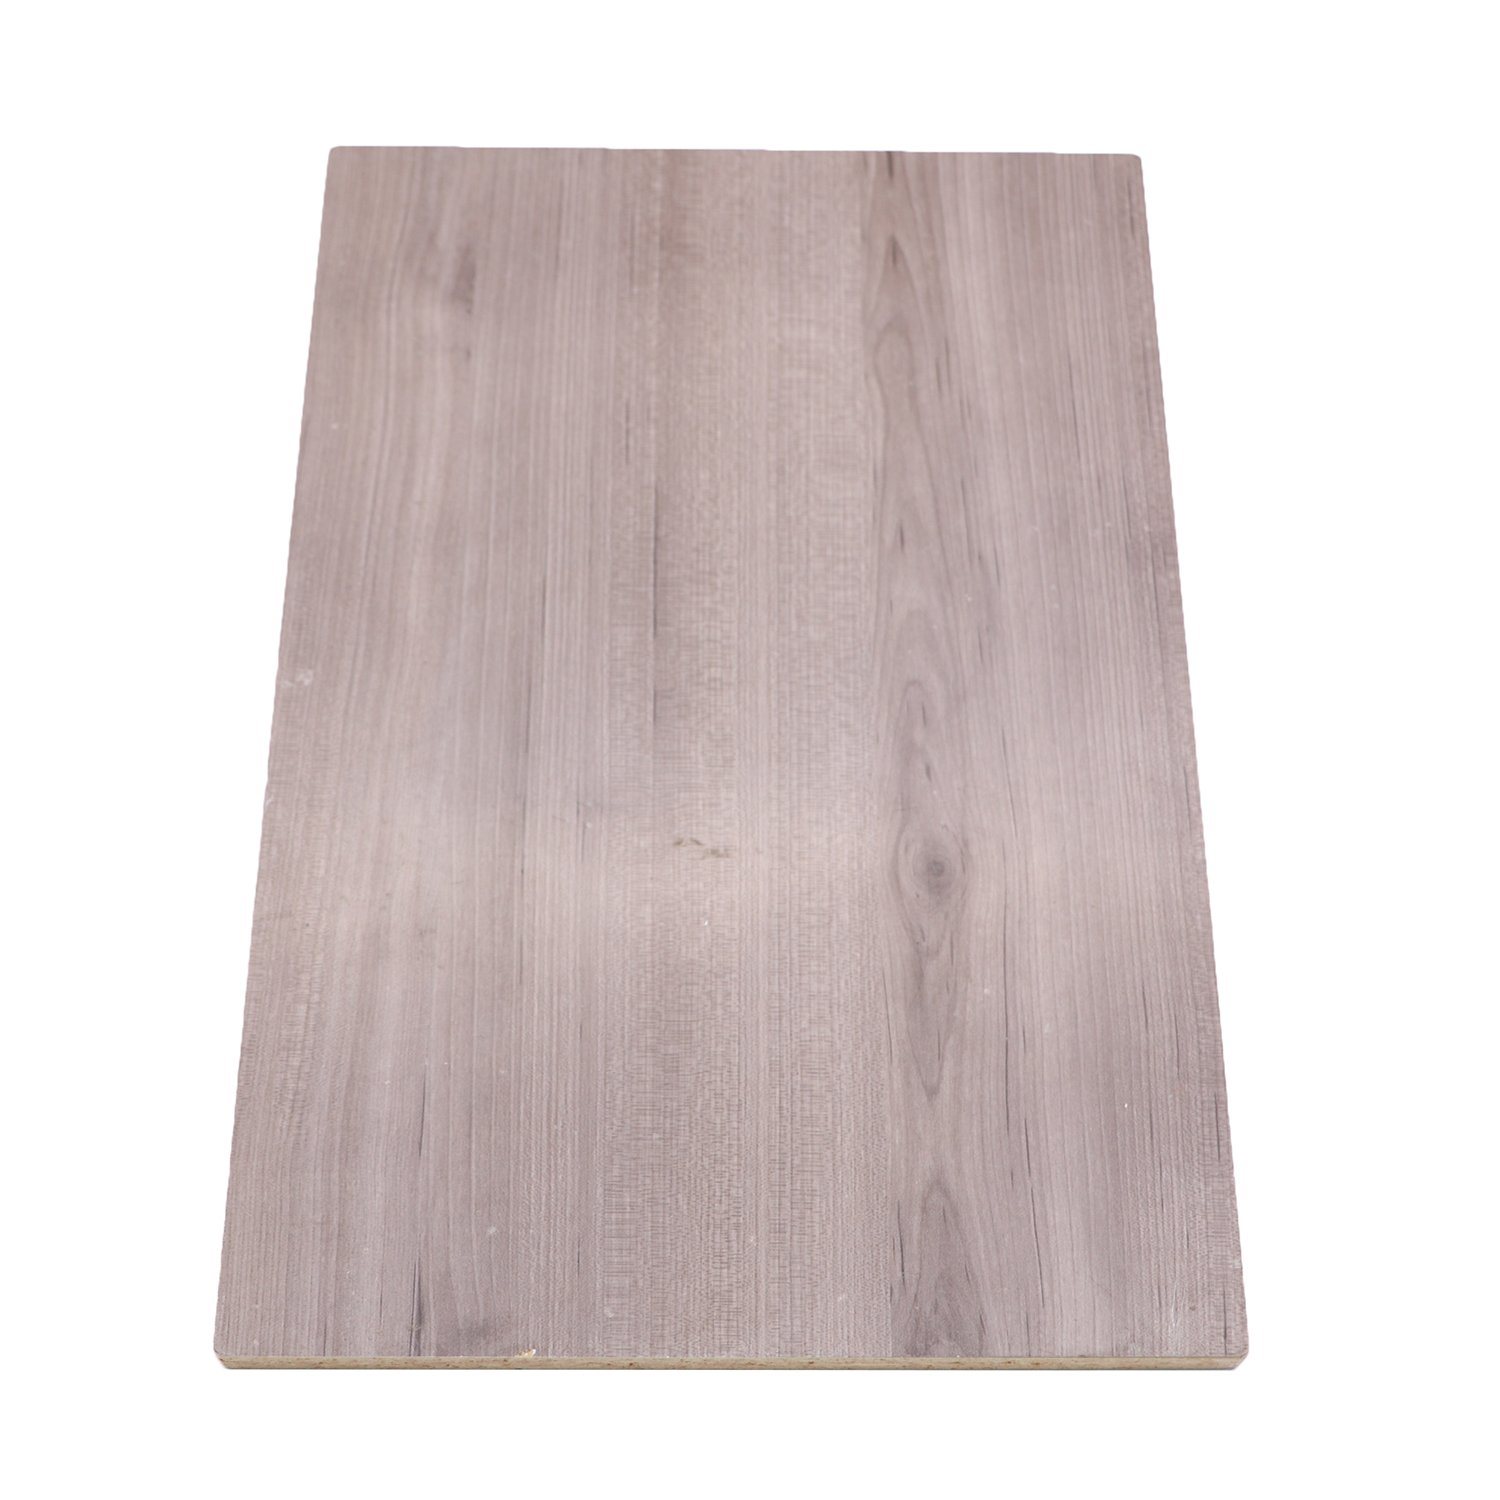 China Excellent Grade Woodgrain Particle Board Melamine Faced Chipboard for Furniture